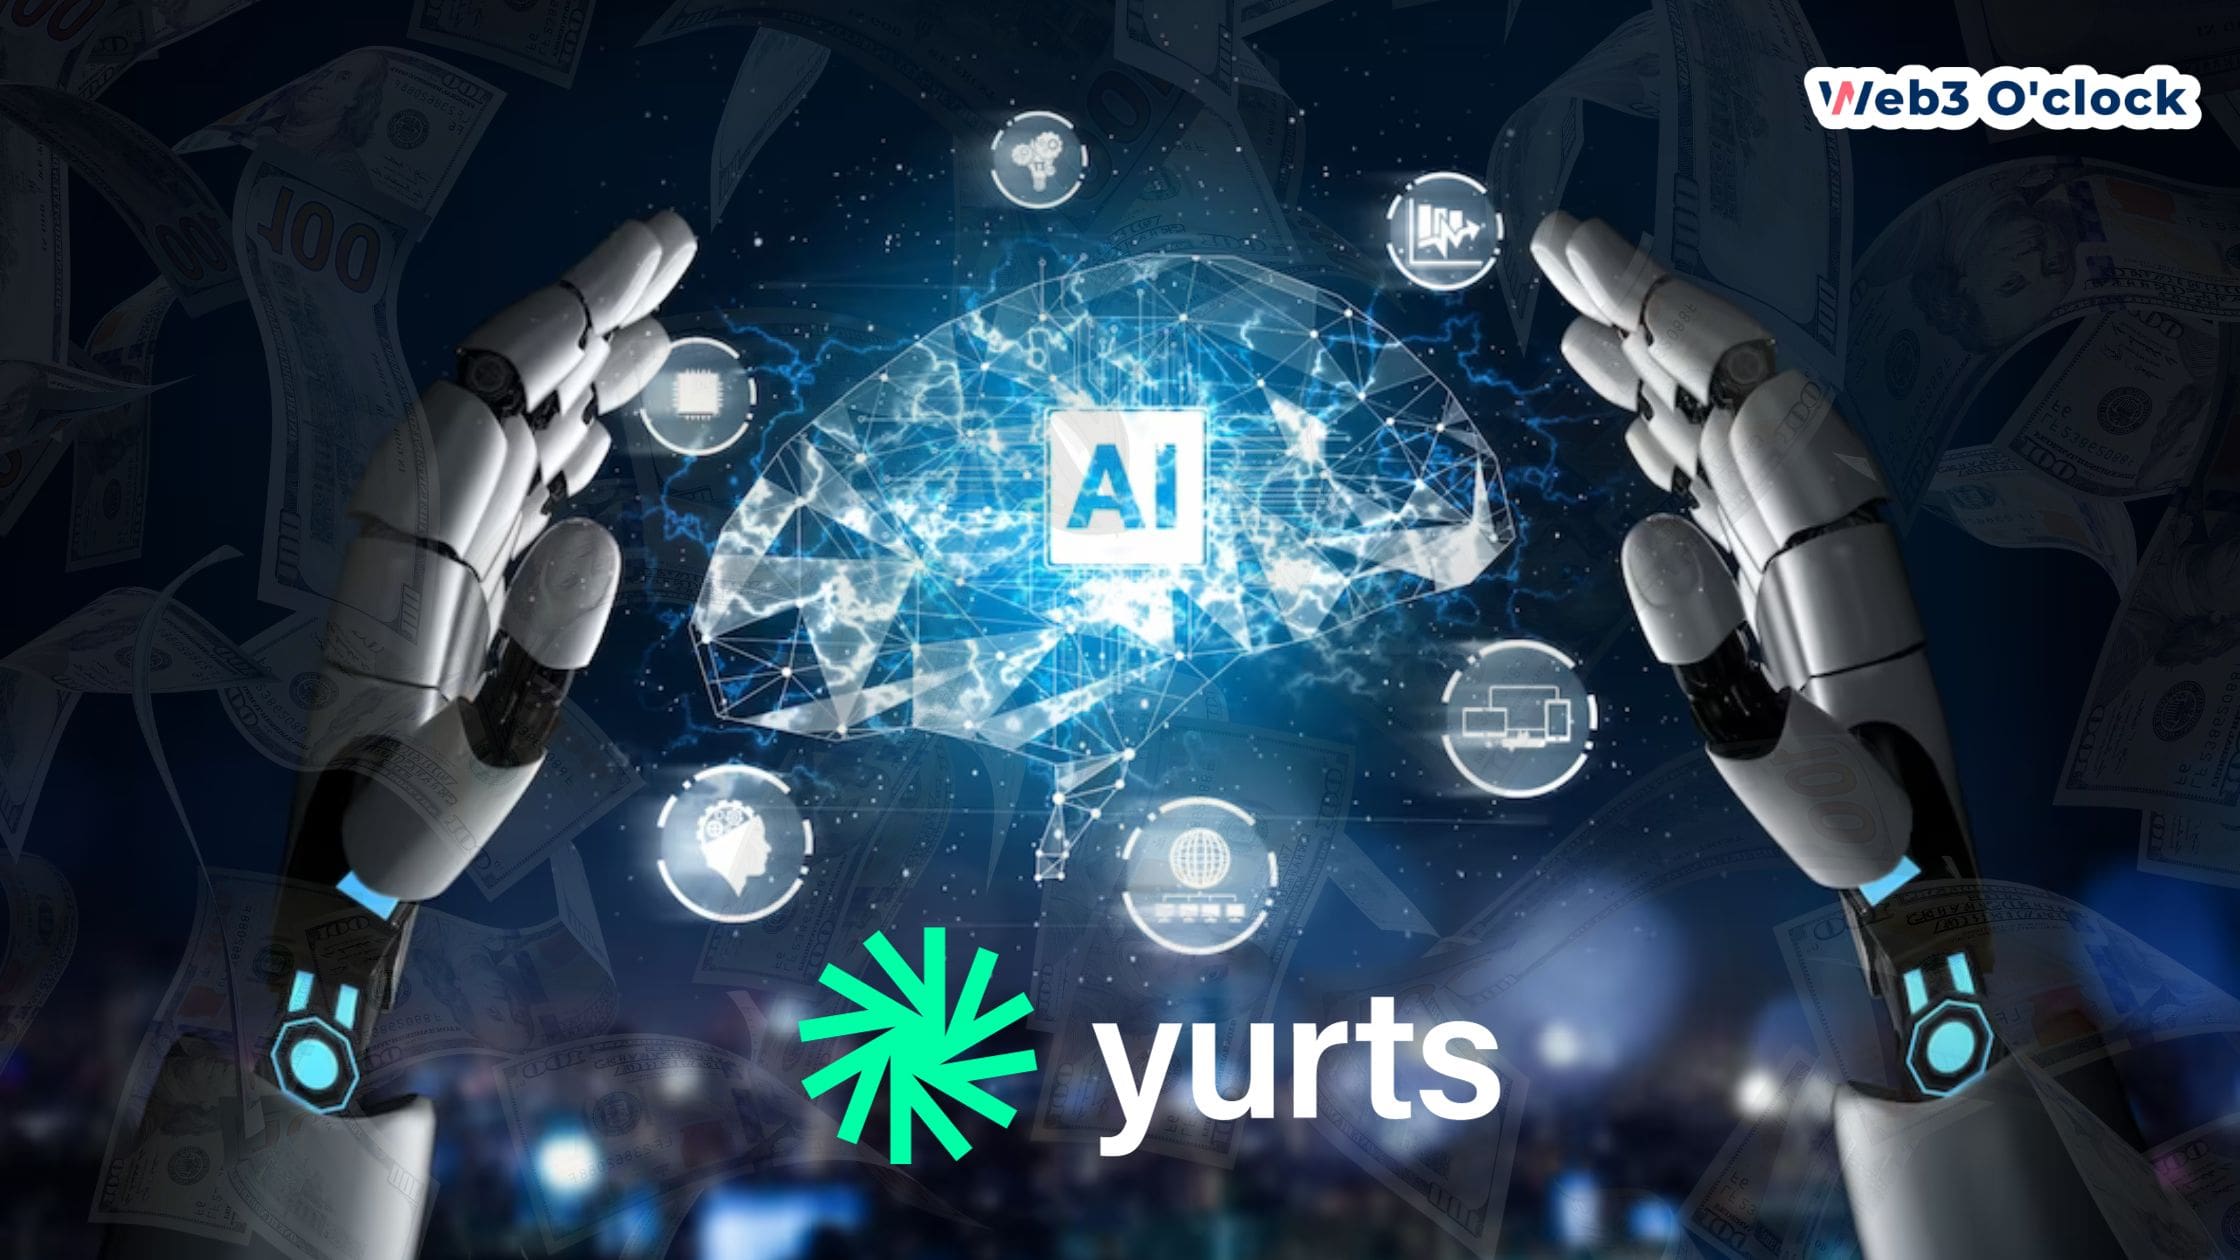 Yurts Secures $16 Million by web3oclock